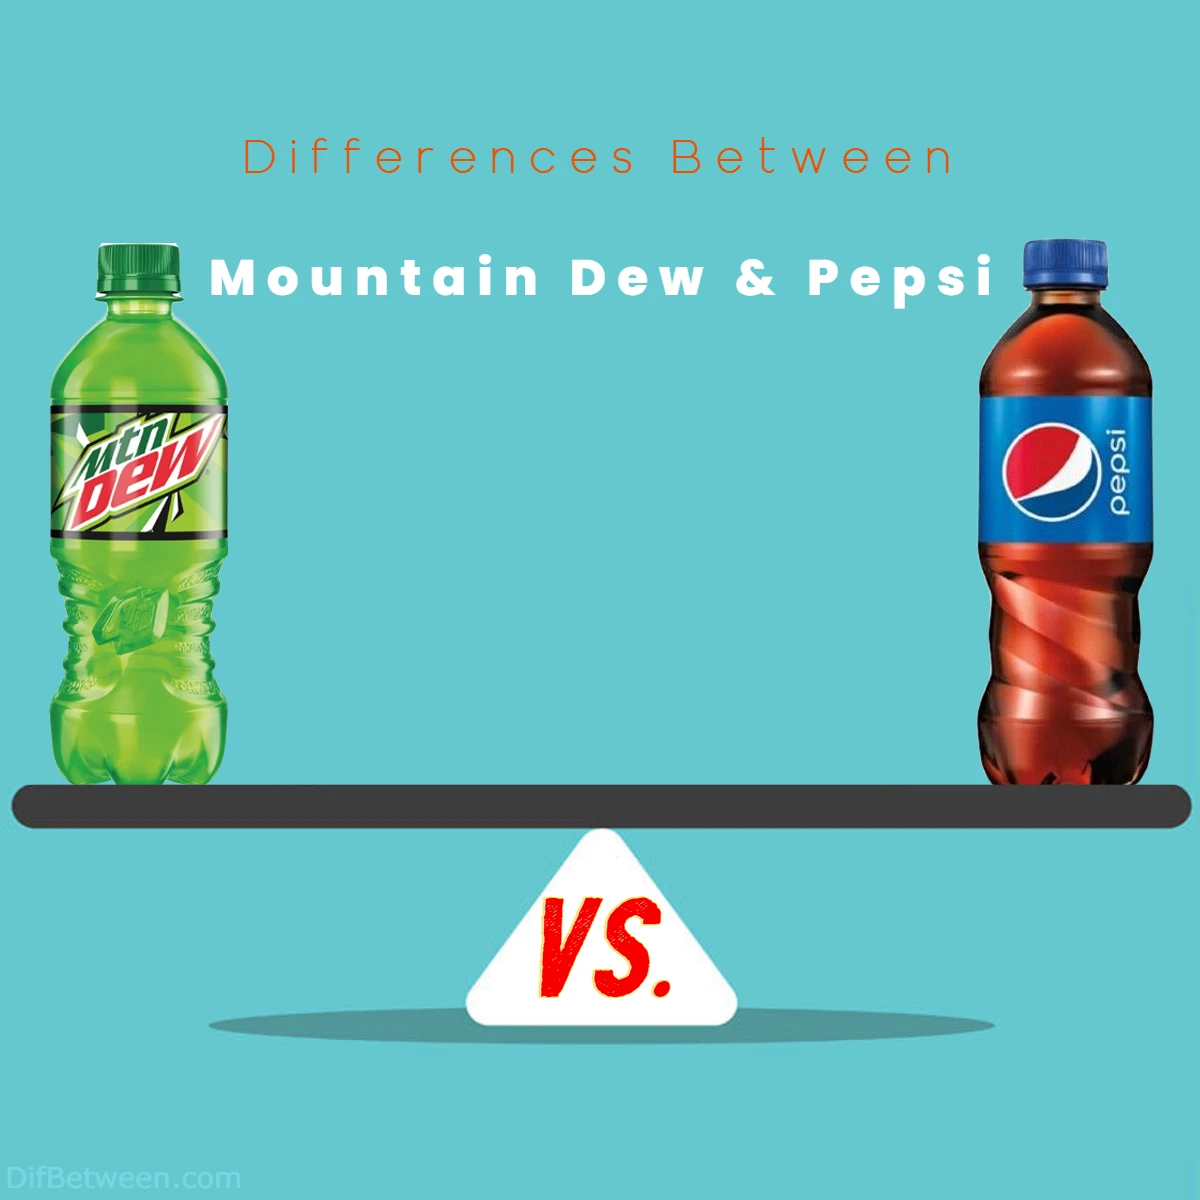 Differences Between Pepsi and Mountain Dew